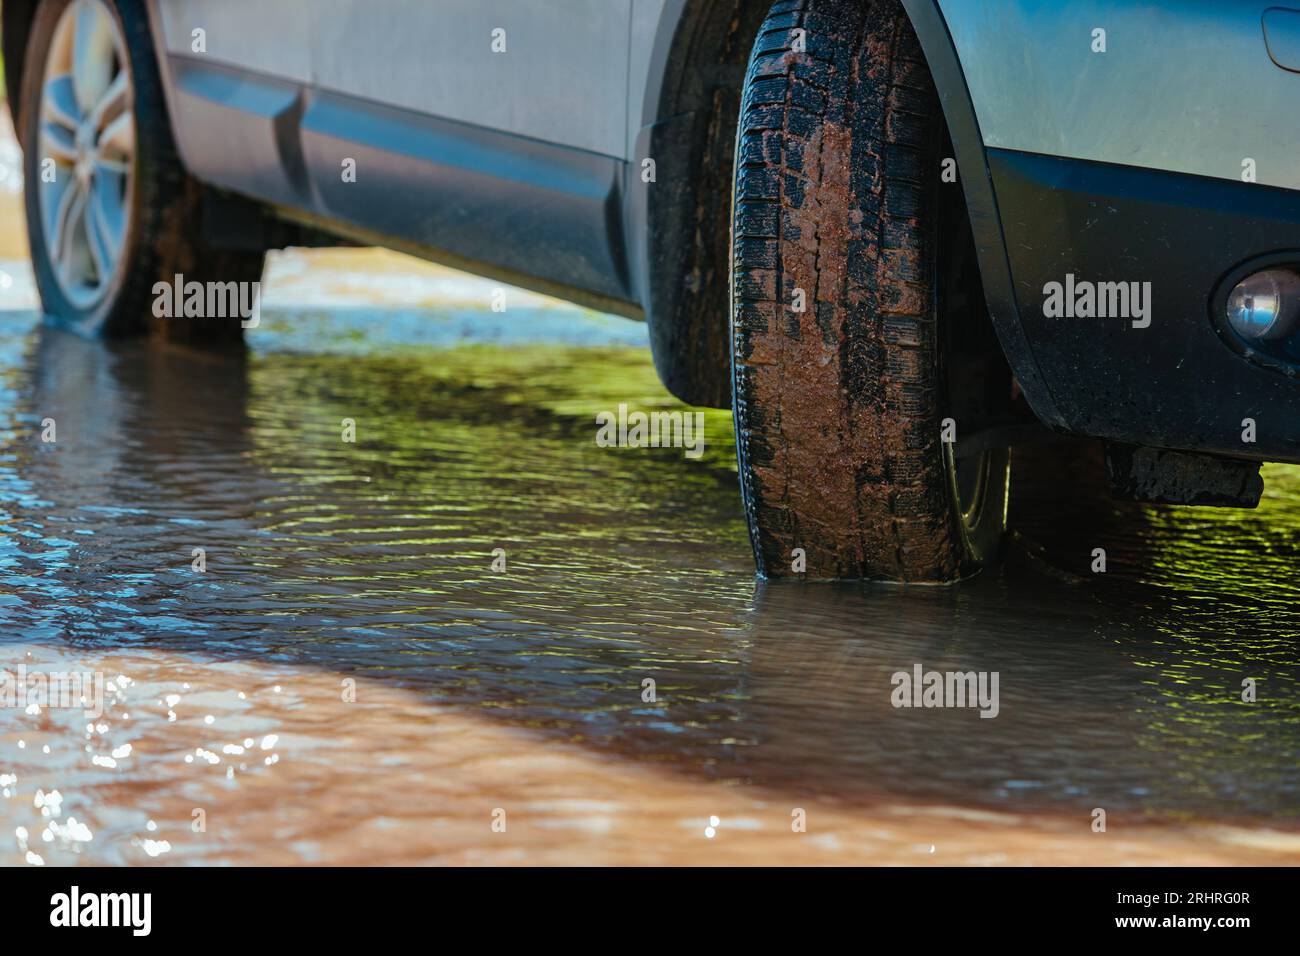 Car wheel standing offroad in a muddy puddle close-up view Stock Photo